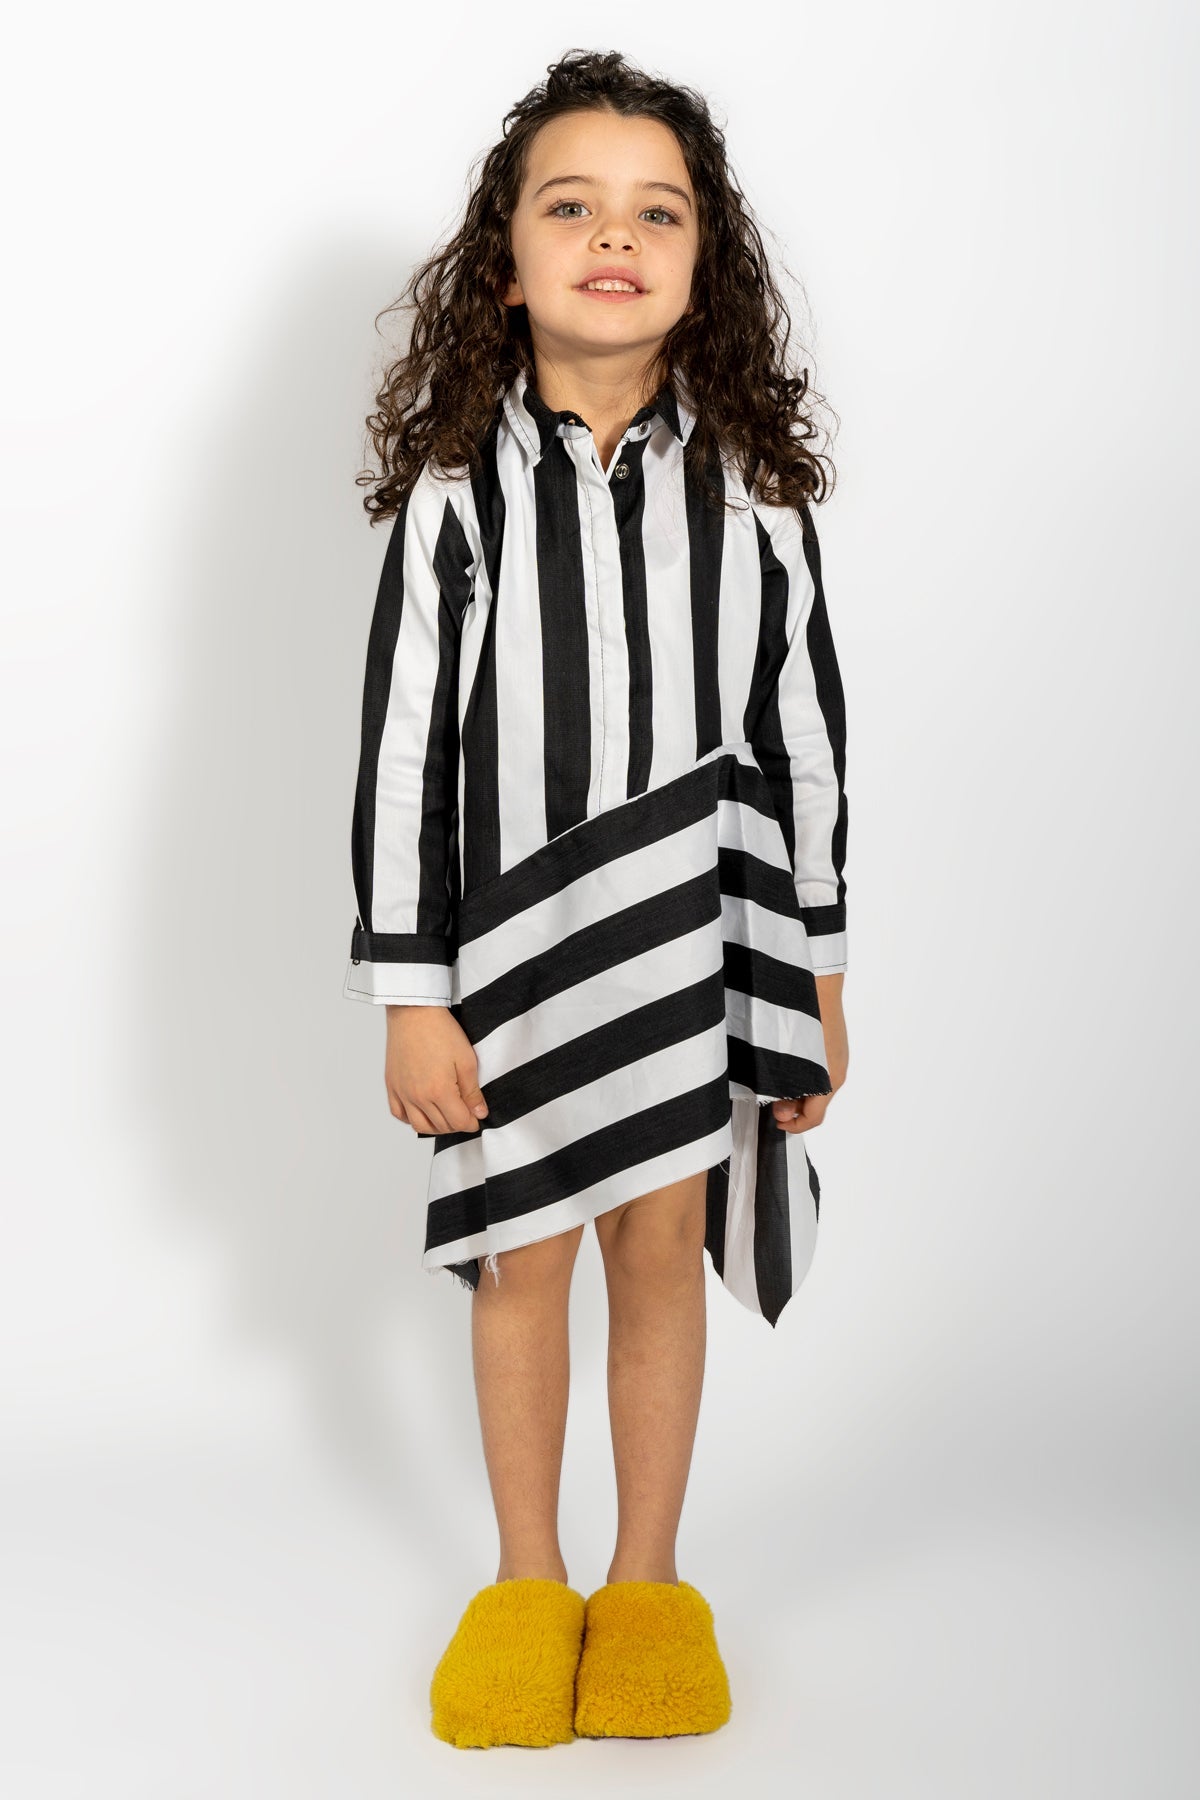 M'A KIDS SHIRT DRESS IN BLACK AND WHITE